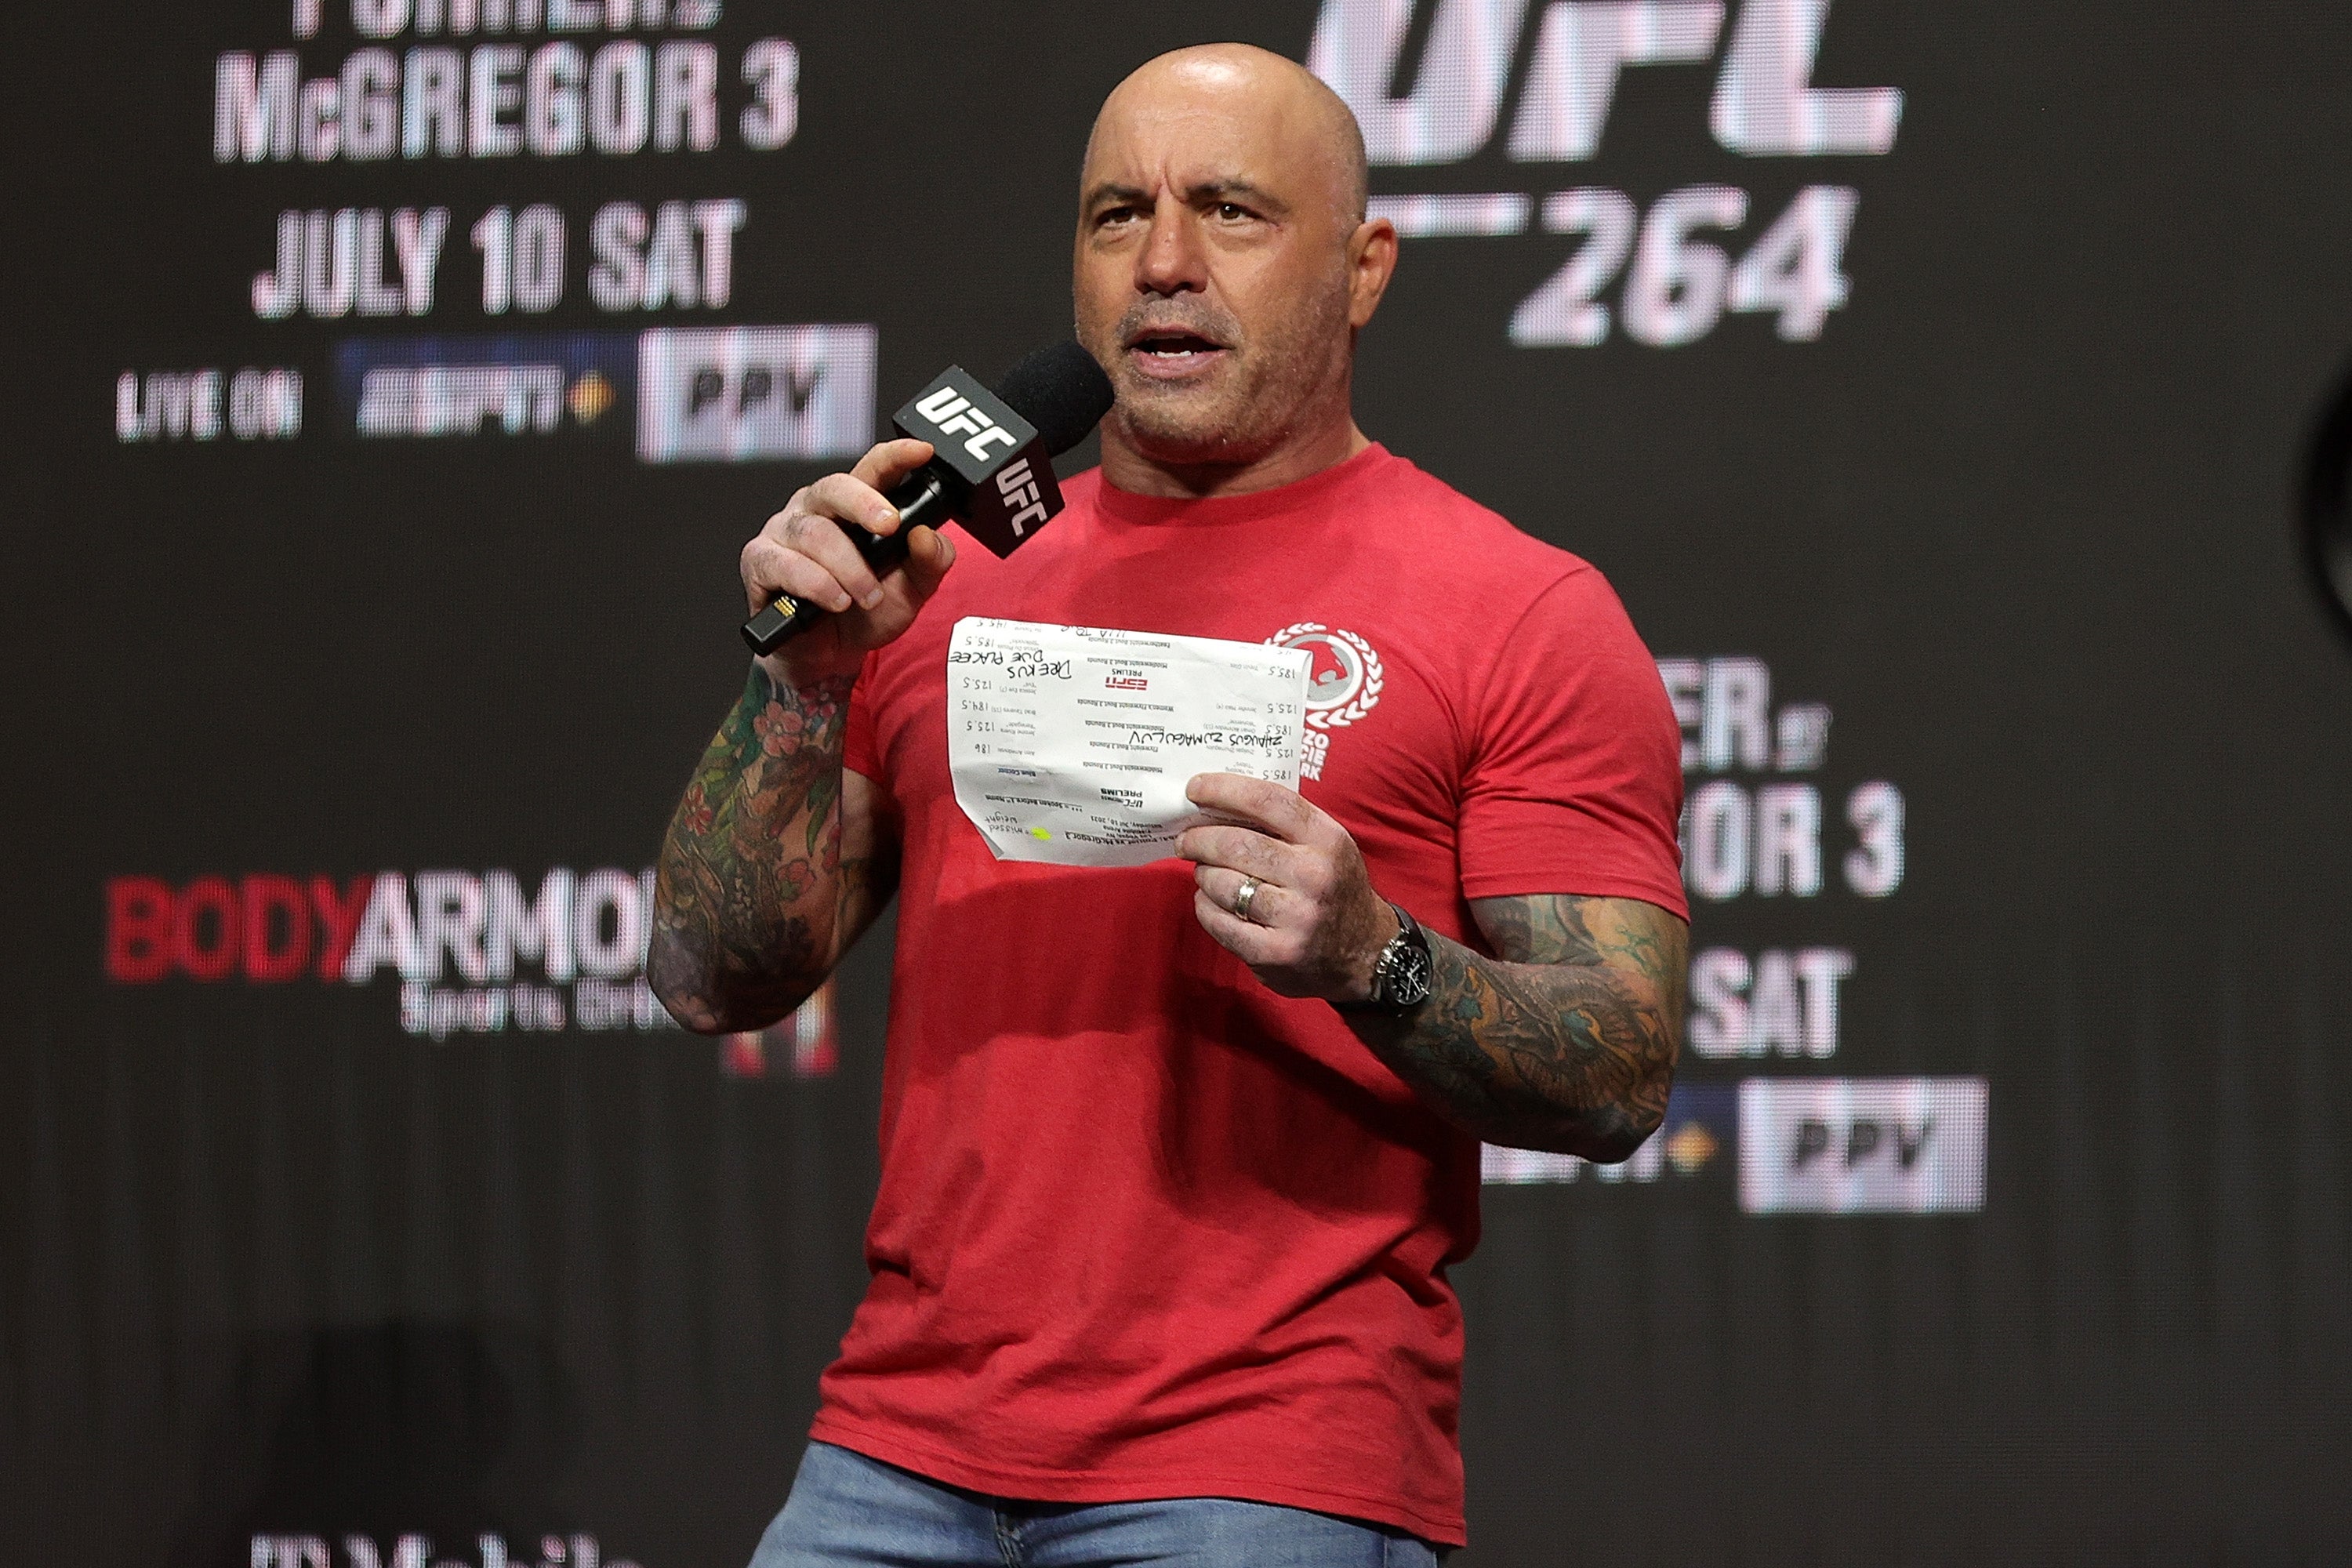 UFC ring announcer Joe Rogan is also known for his Joe Rogan Experience podcast